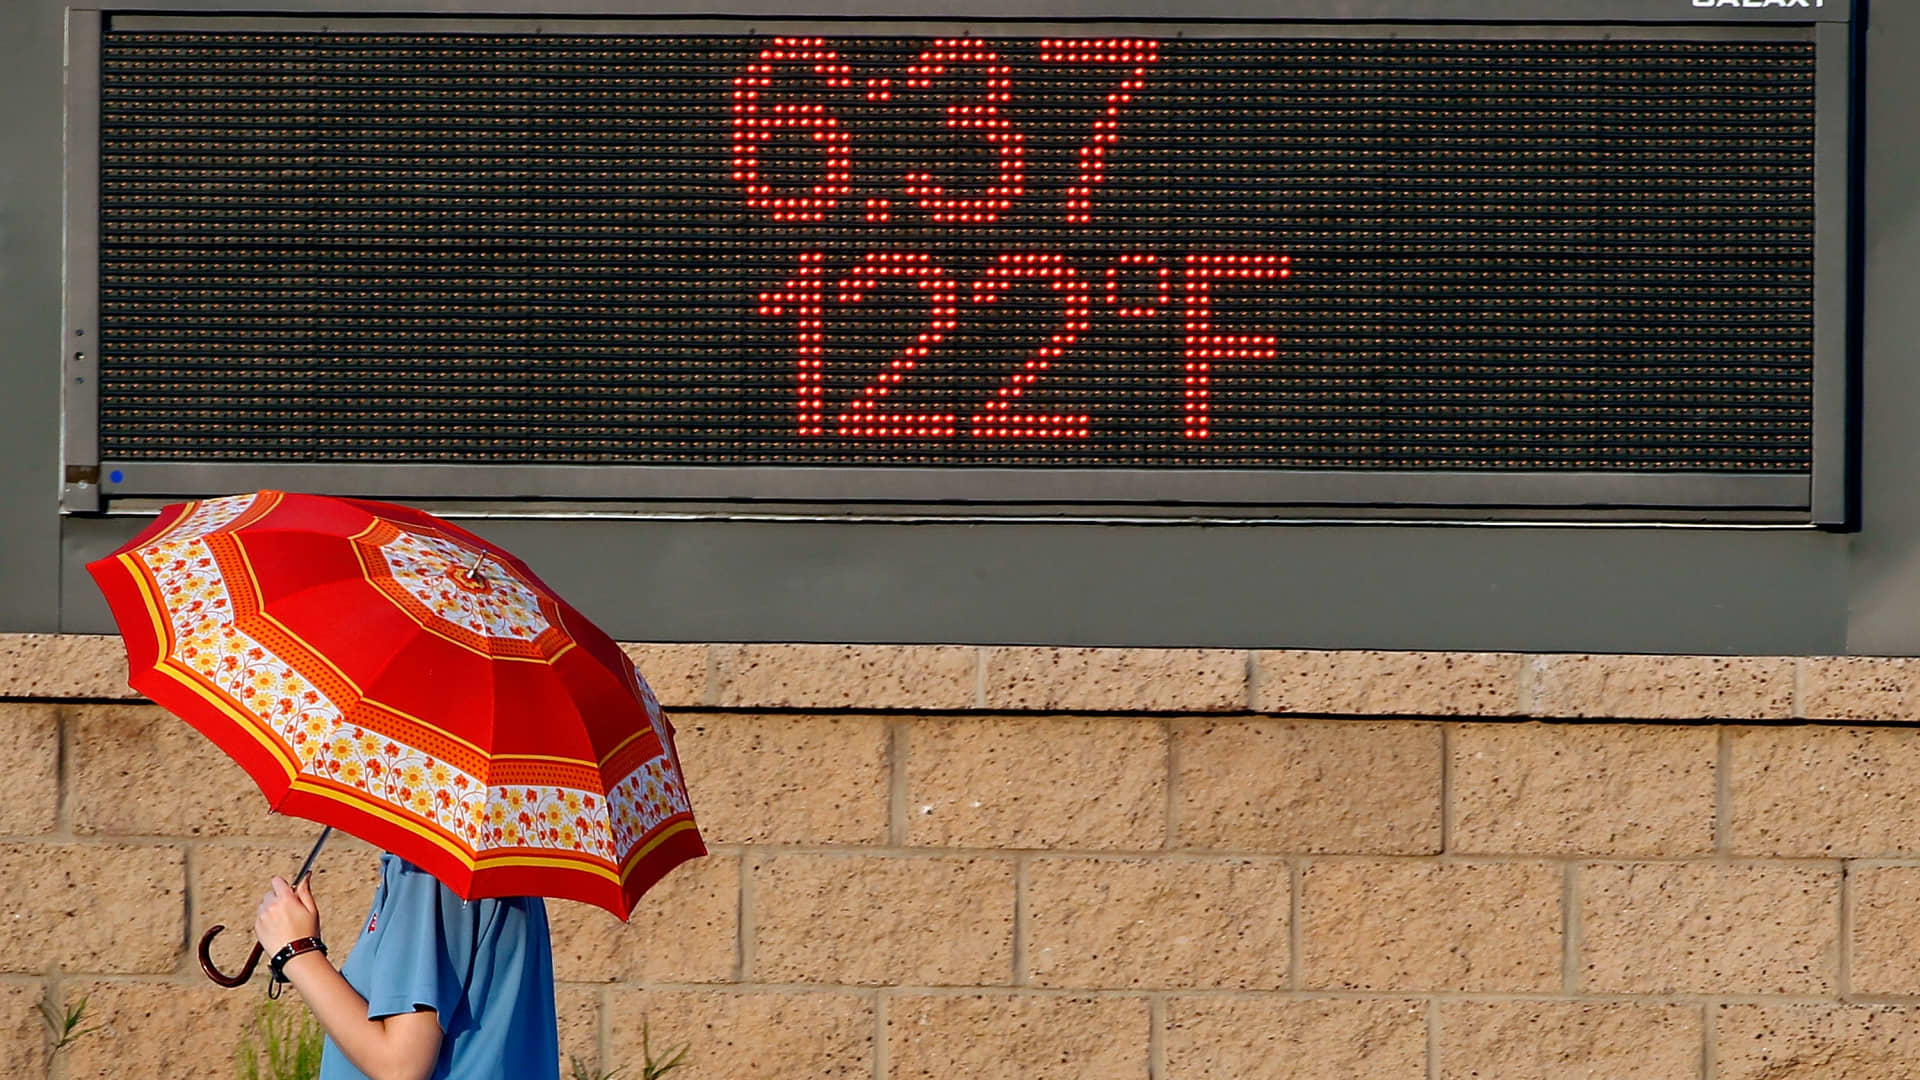 A pedestrian uses an umbrella to get some relief from the sun as she walks past a sign displaying the temperature on June 20, 2017 in Phoenix, Arizona.